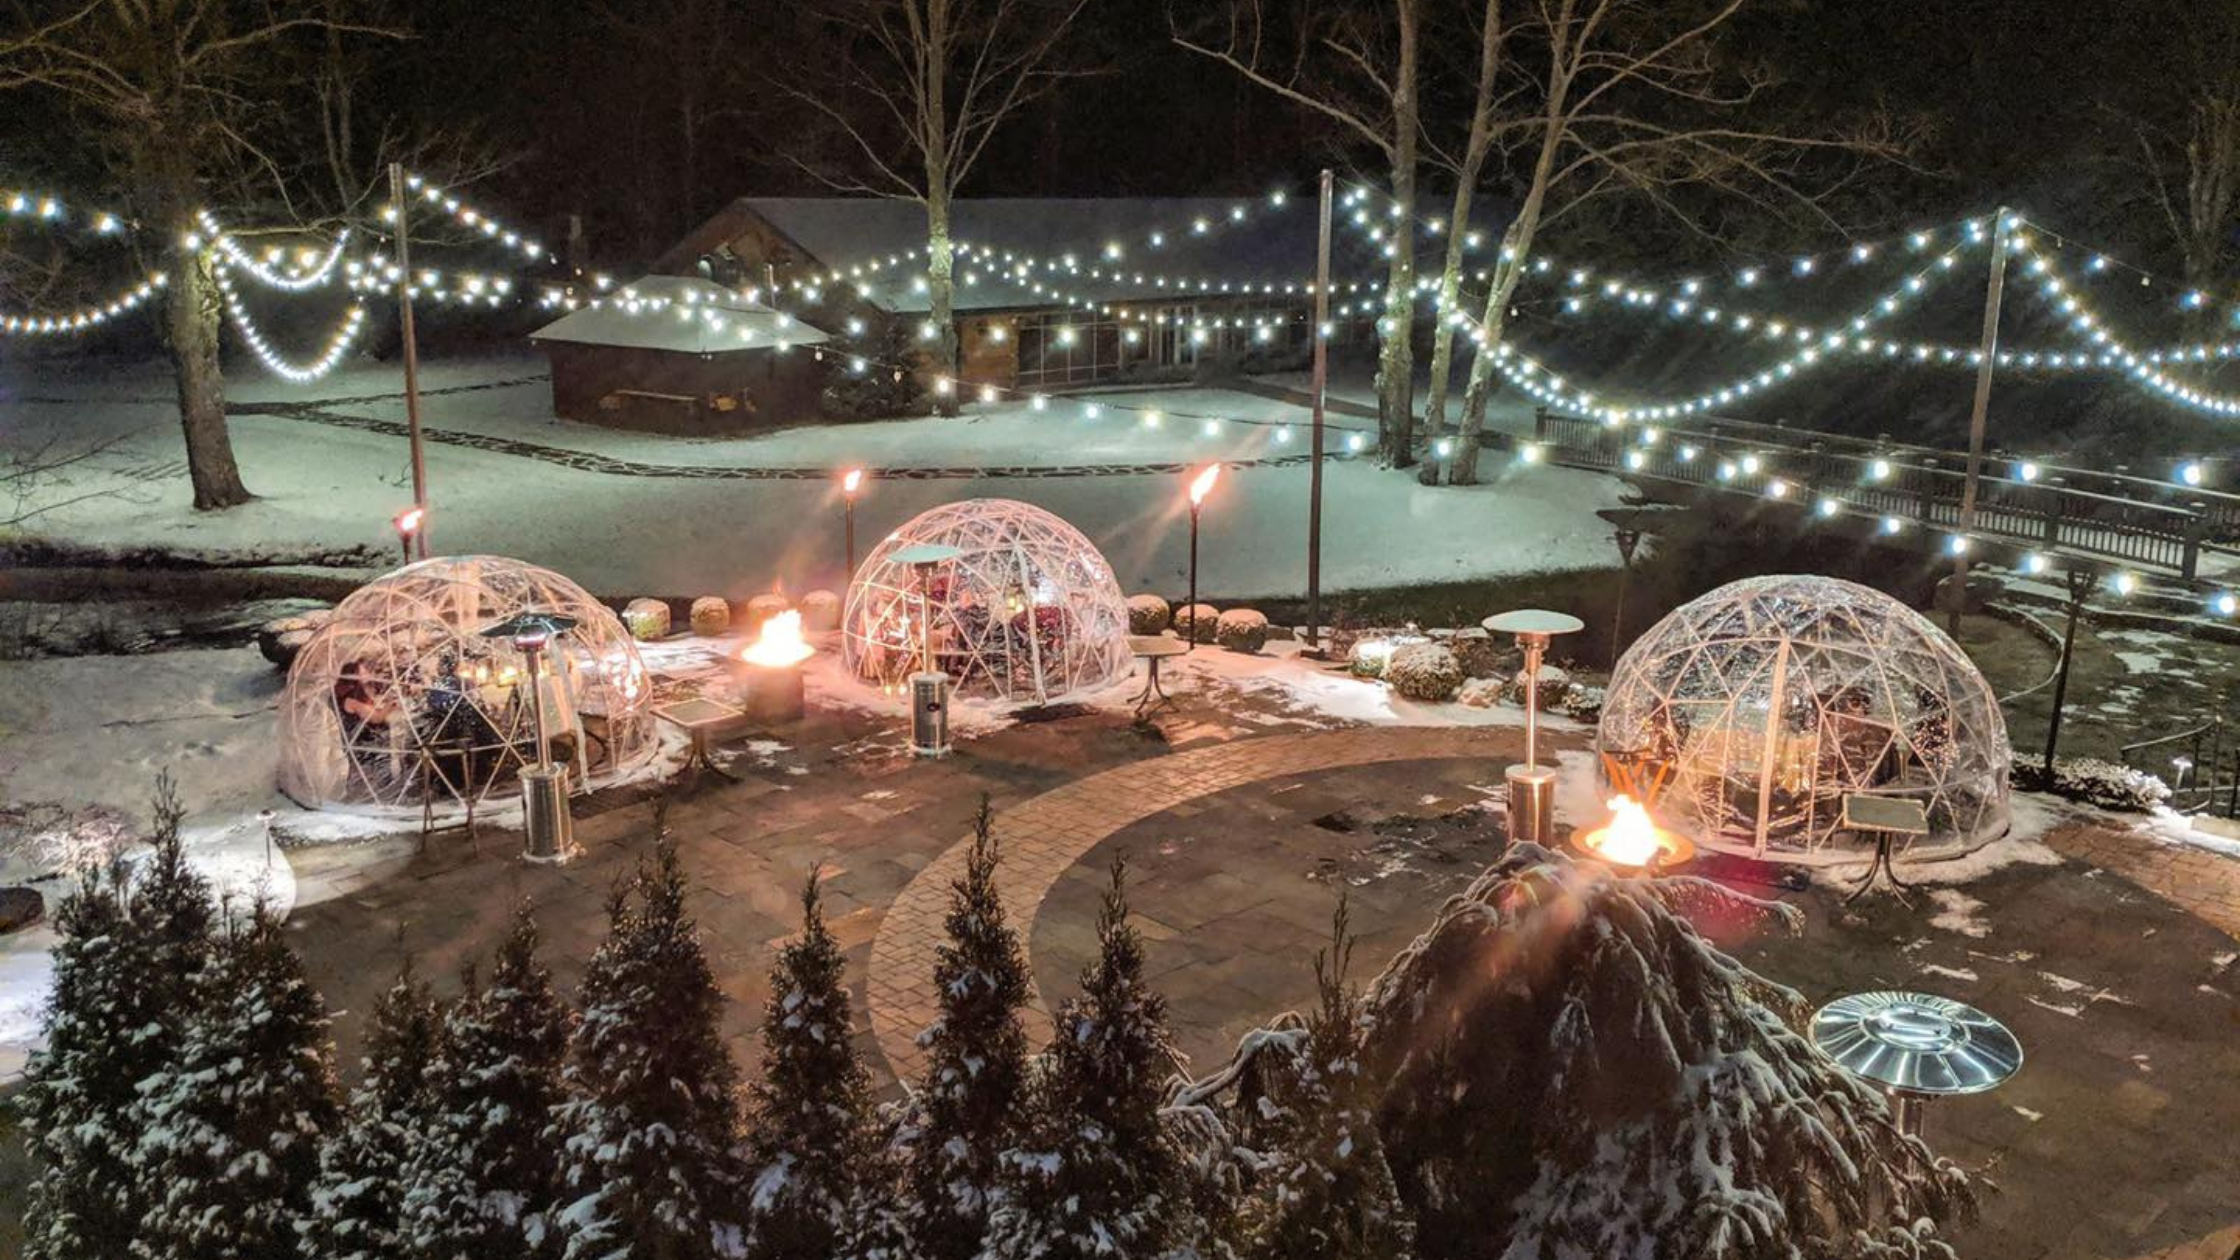 Spend Your Valentine’s Dining in an Igloo